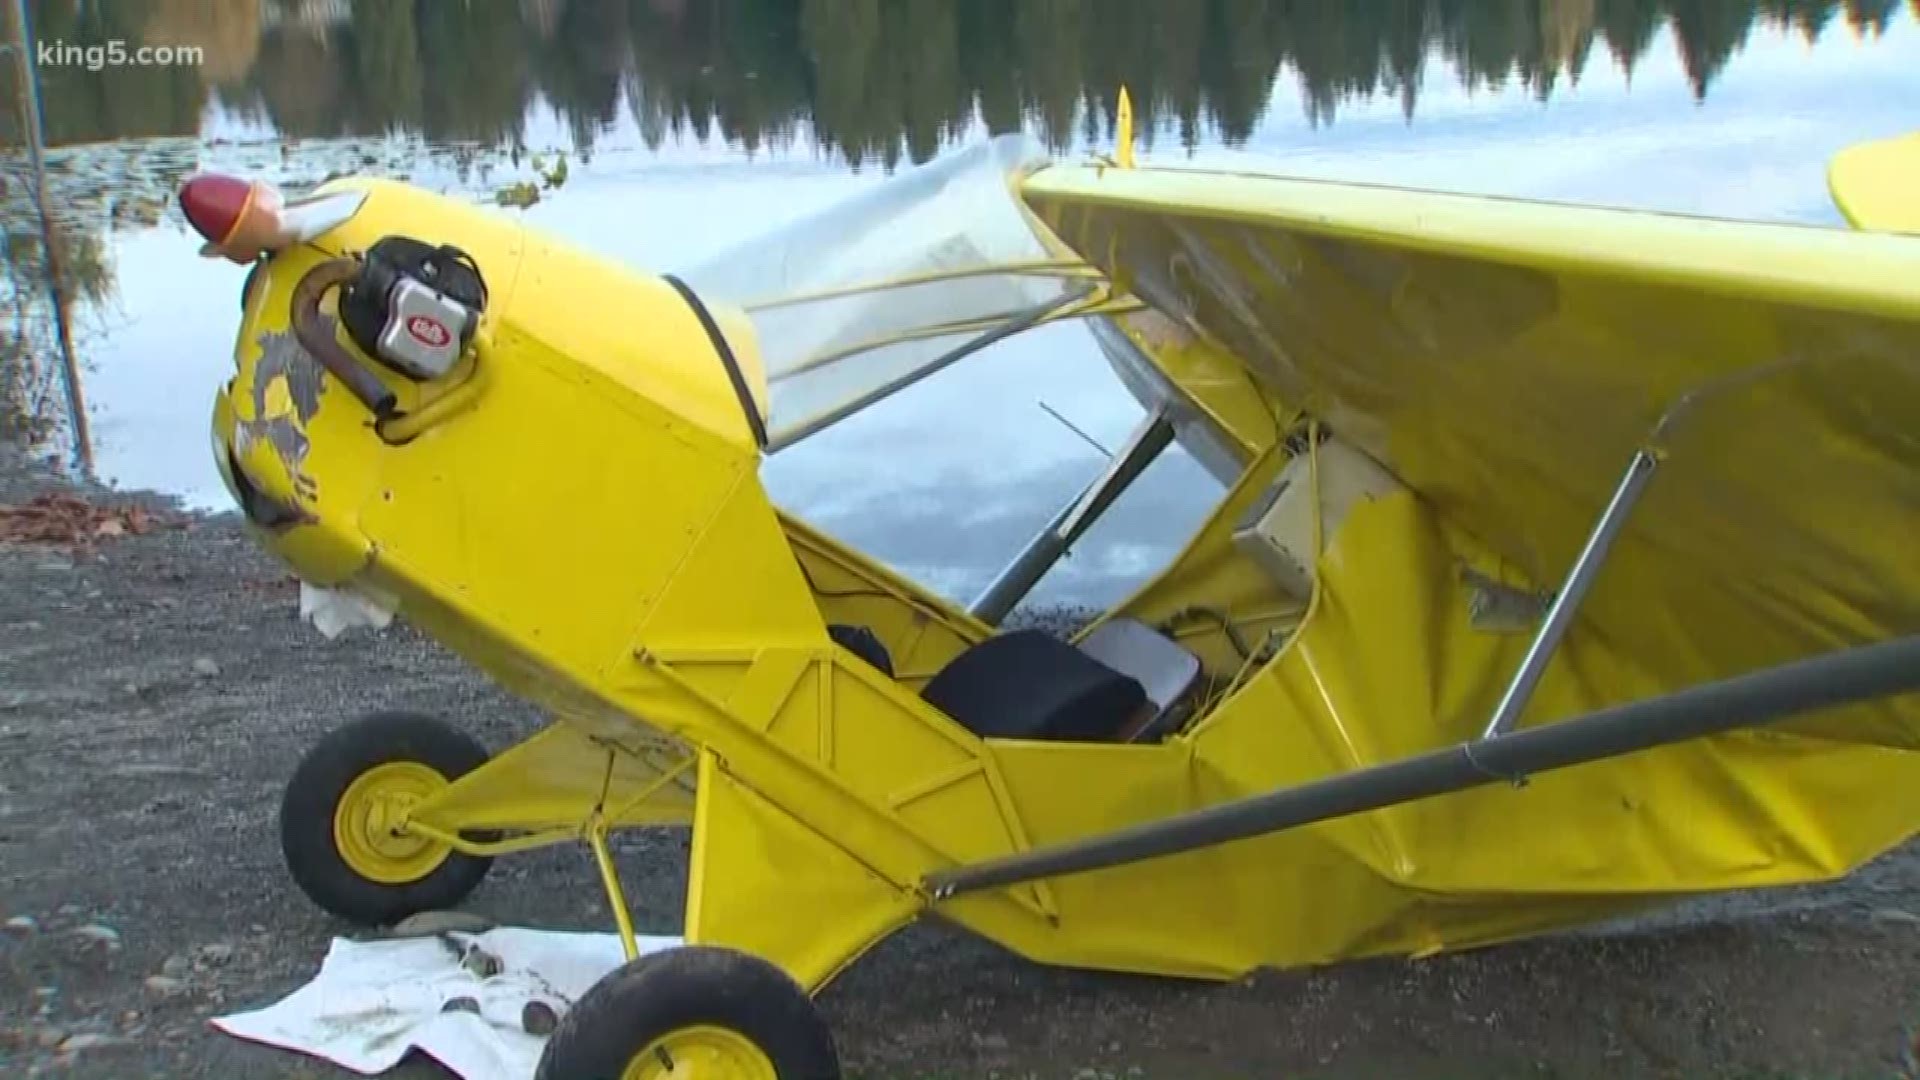 It took divers hours to pull the plane out of the lake. The pilot is expected to survive.